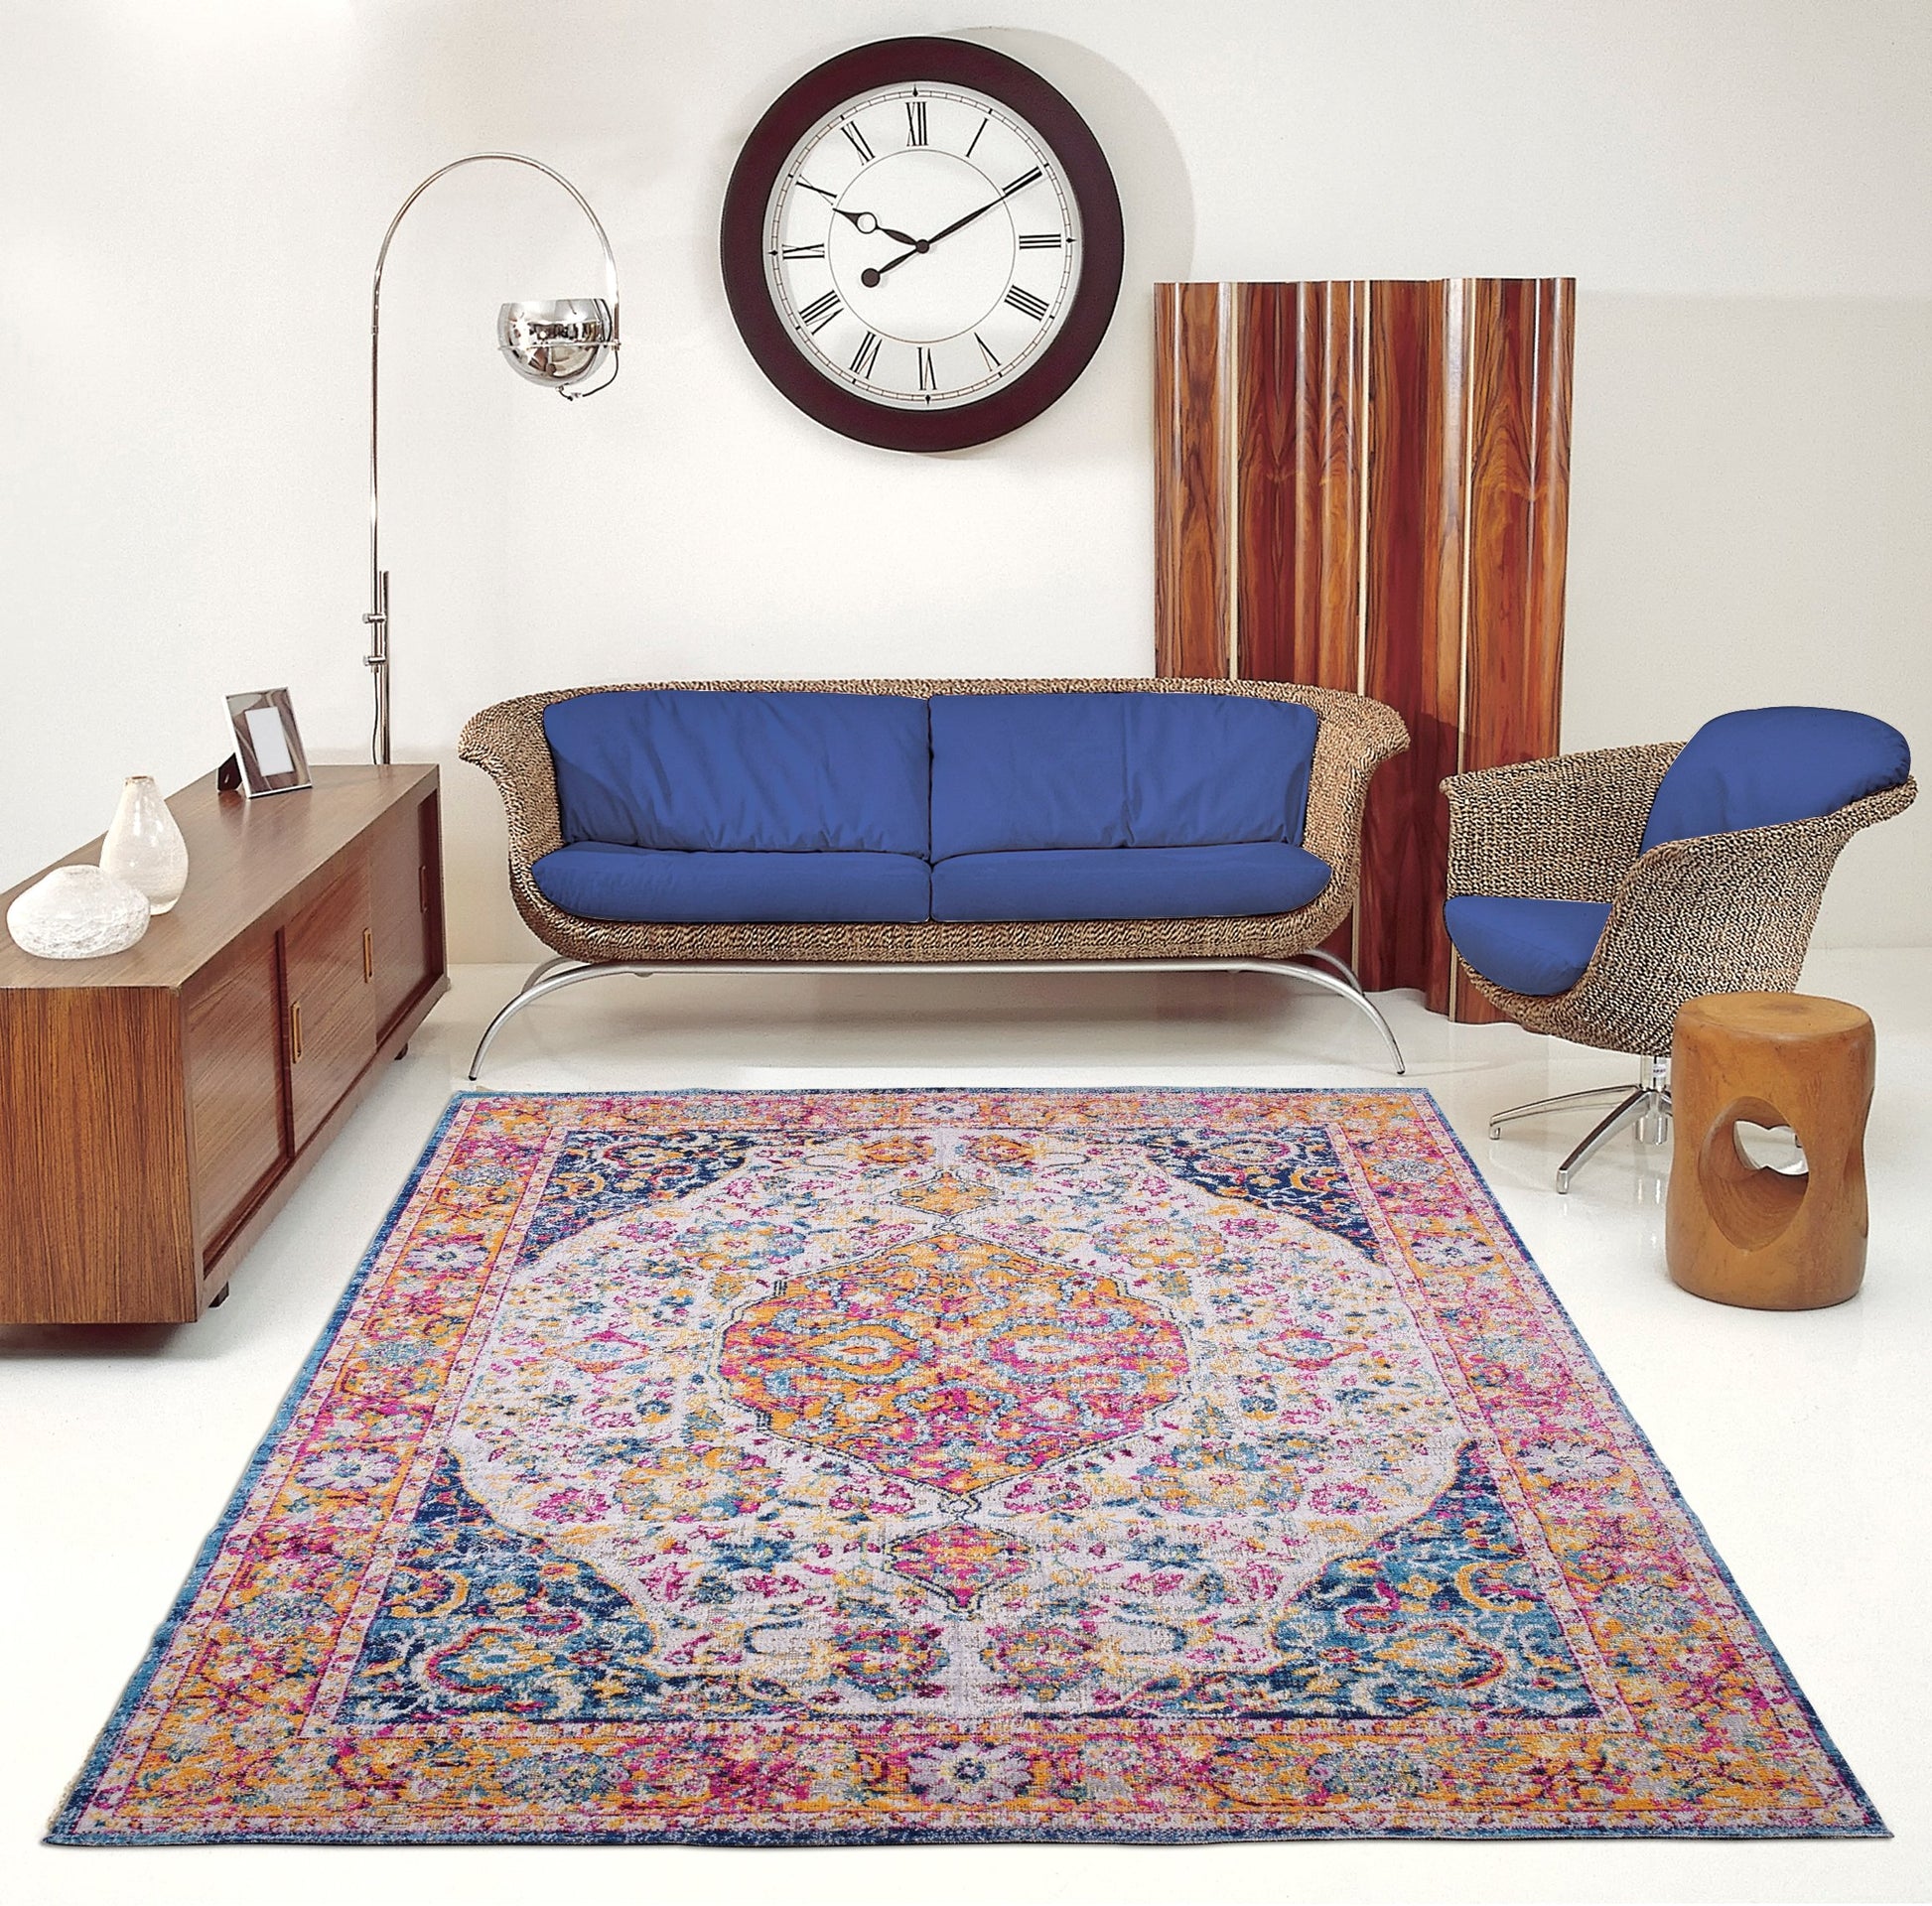 ladole rugs timeless collection florida vintage outdoor made in europe runner in multicolor 3x5 27 x 411 80cm x 150cm 6x8, 6x9 ft Living Room, Bedroom, Dining Area, Kitchen Carpet